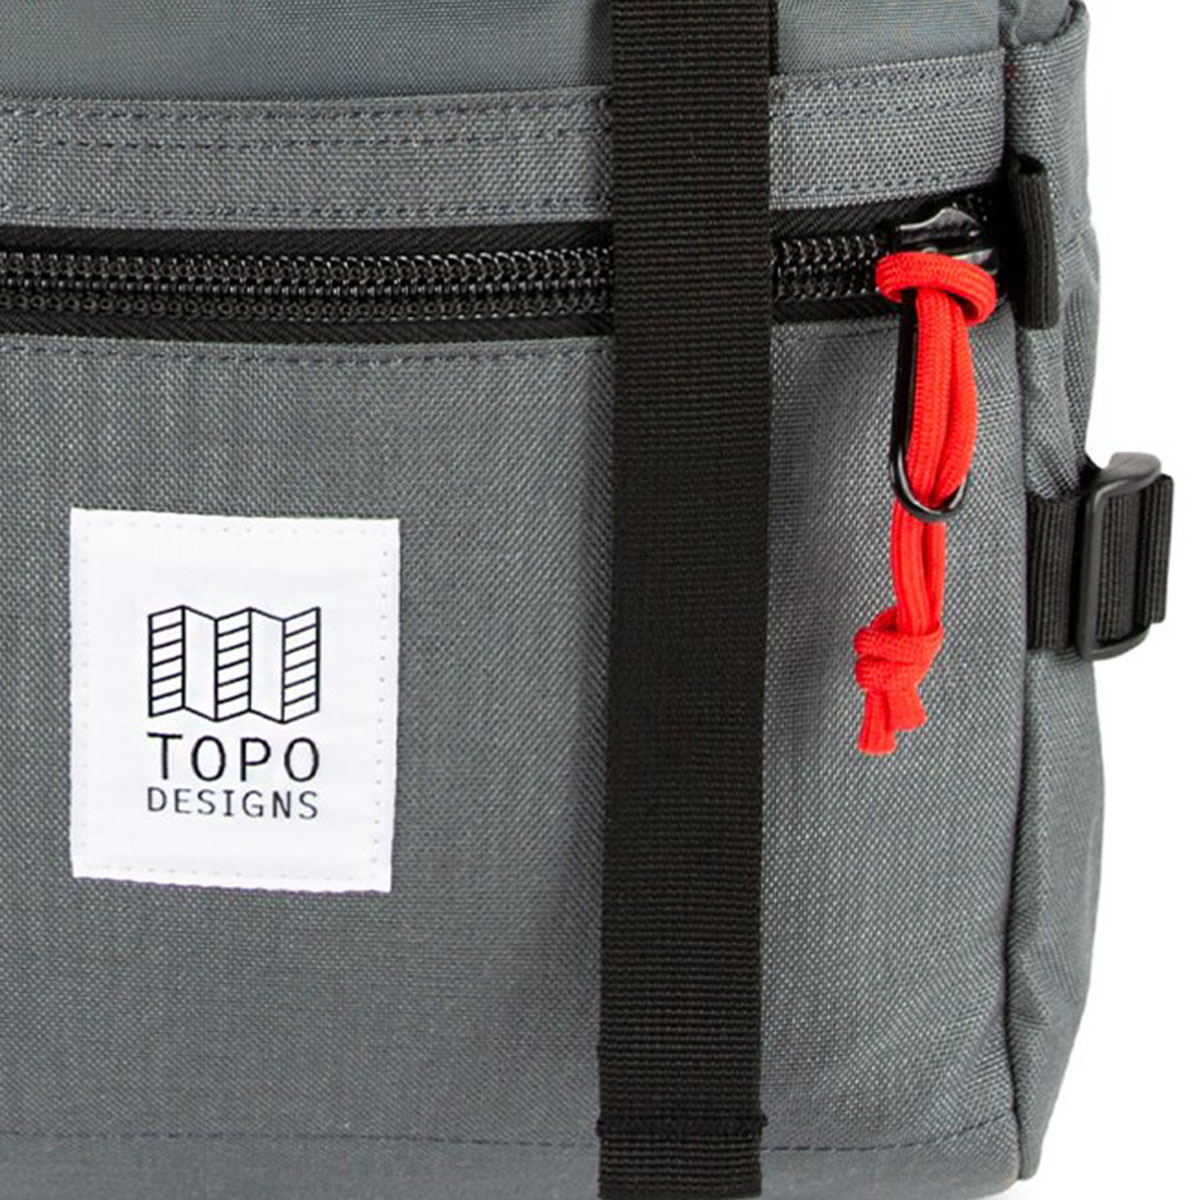 Topo Designs Rover Pack Classic Charcoal, timeless backpack with great functionalities